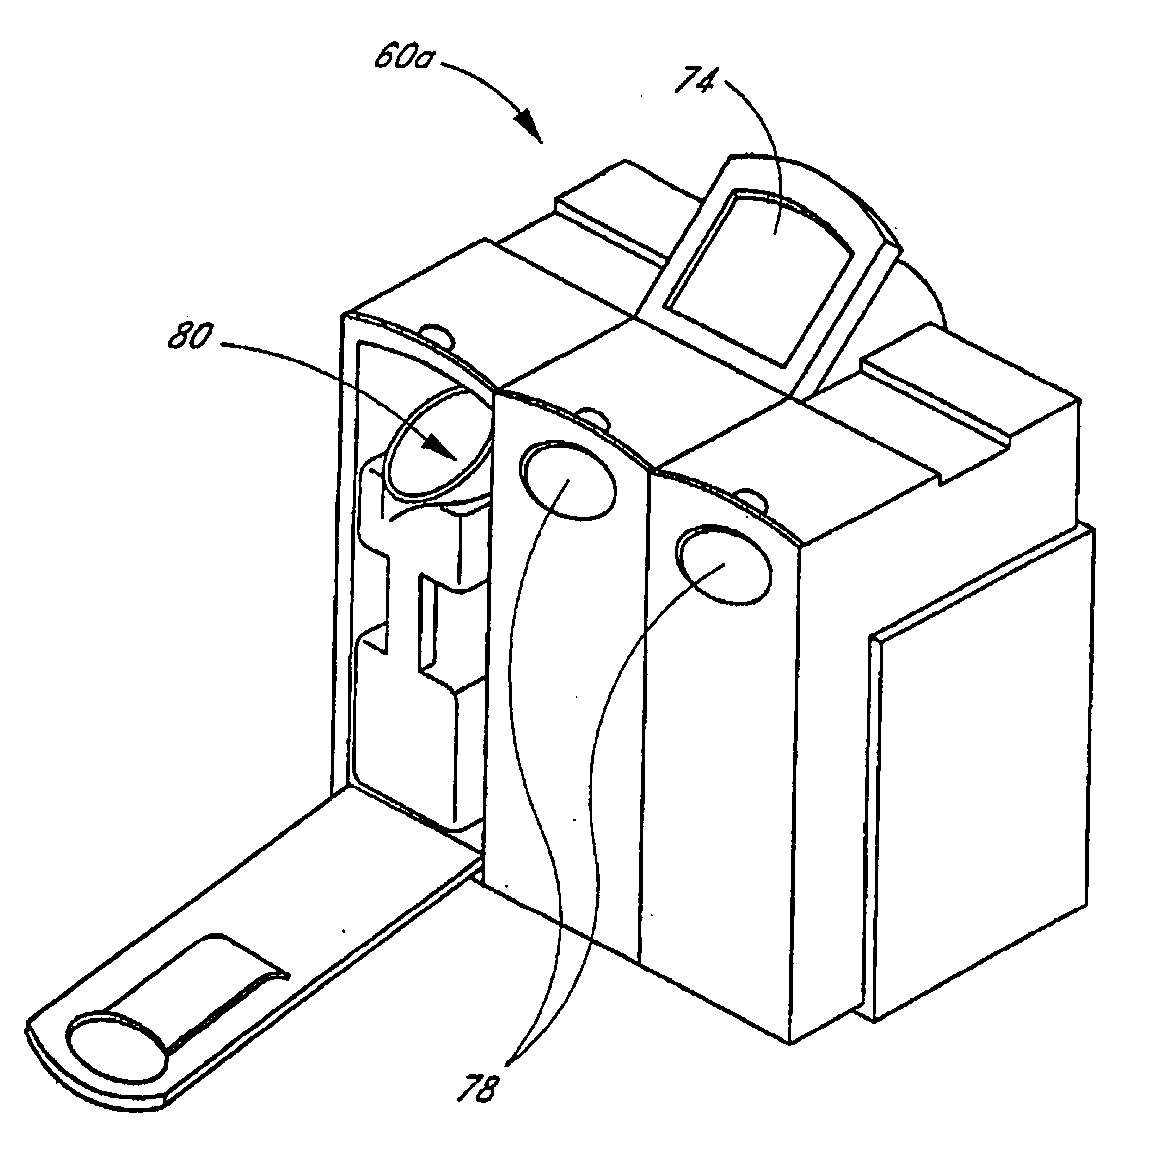 Method for sorting discarded and spent pharmaceutical items